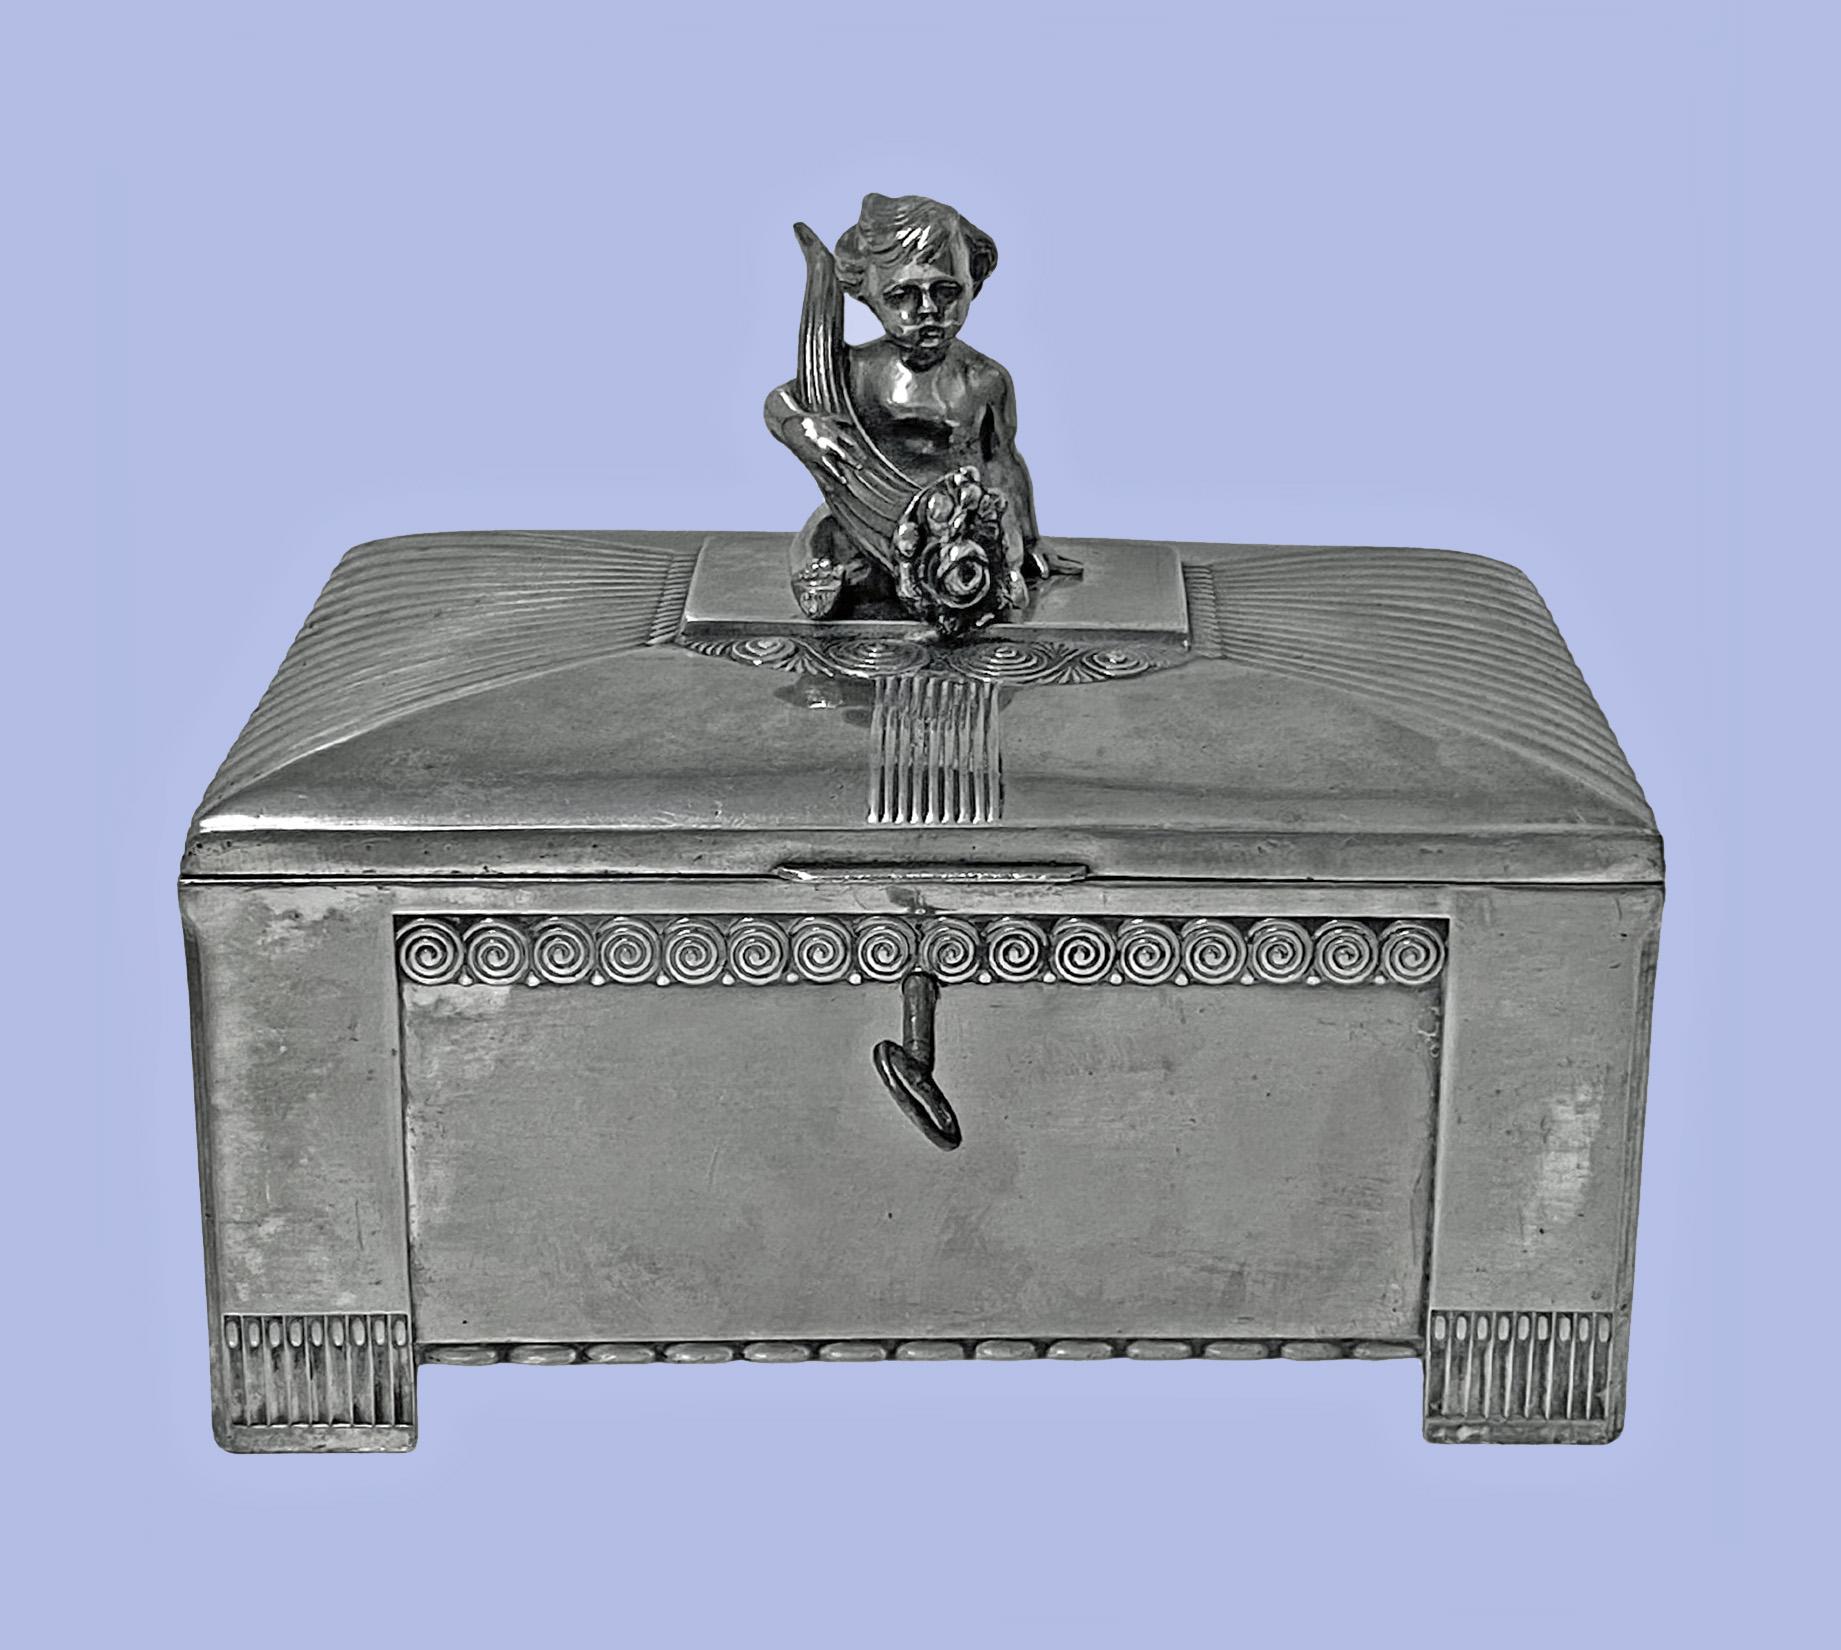 Orivit Jugendstil Secessionist Silver plate large Jewellery Box, Germany, C.1900. This unusual box of rectangular shape on four bracket supports, conforming in style to cornices and decoration of sides and slight dome shape hinged cover with handle